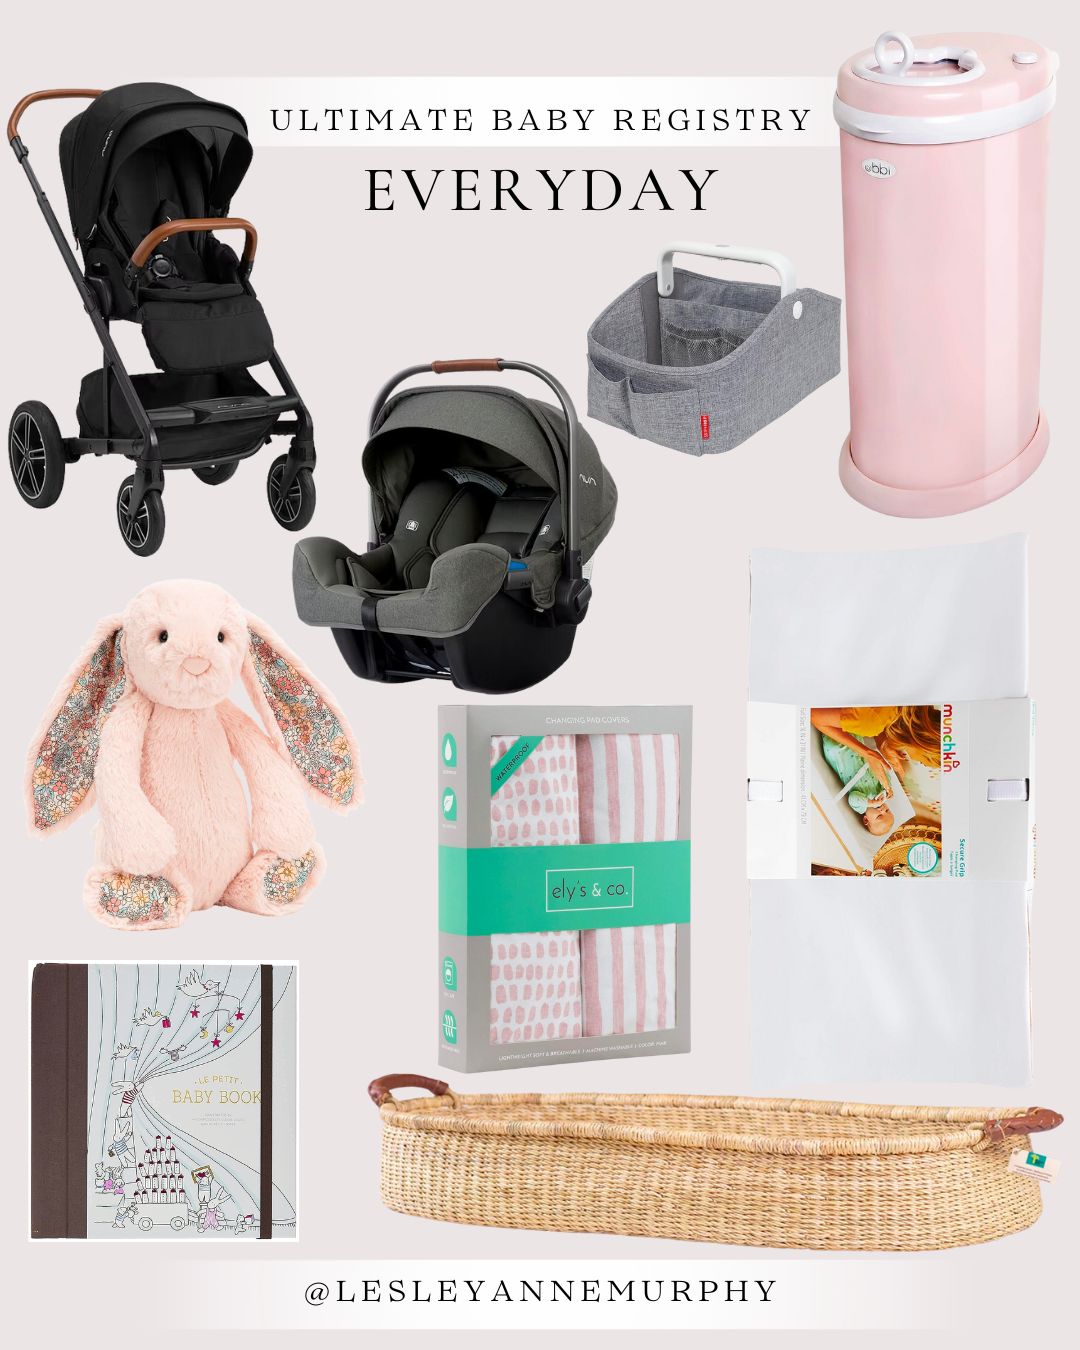 The Ultimate Baby Registry every day essentials